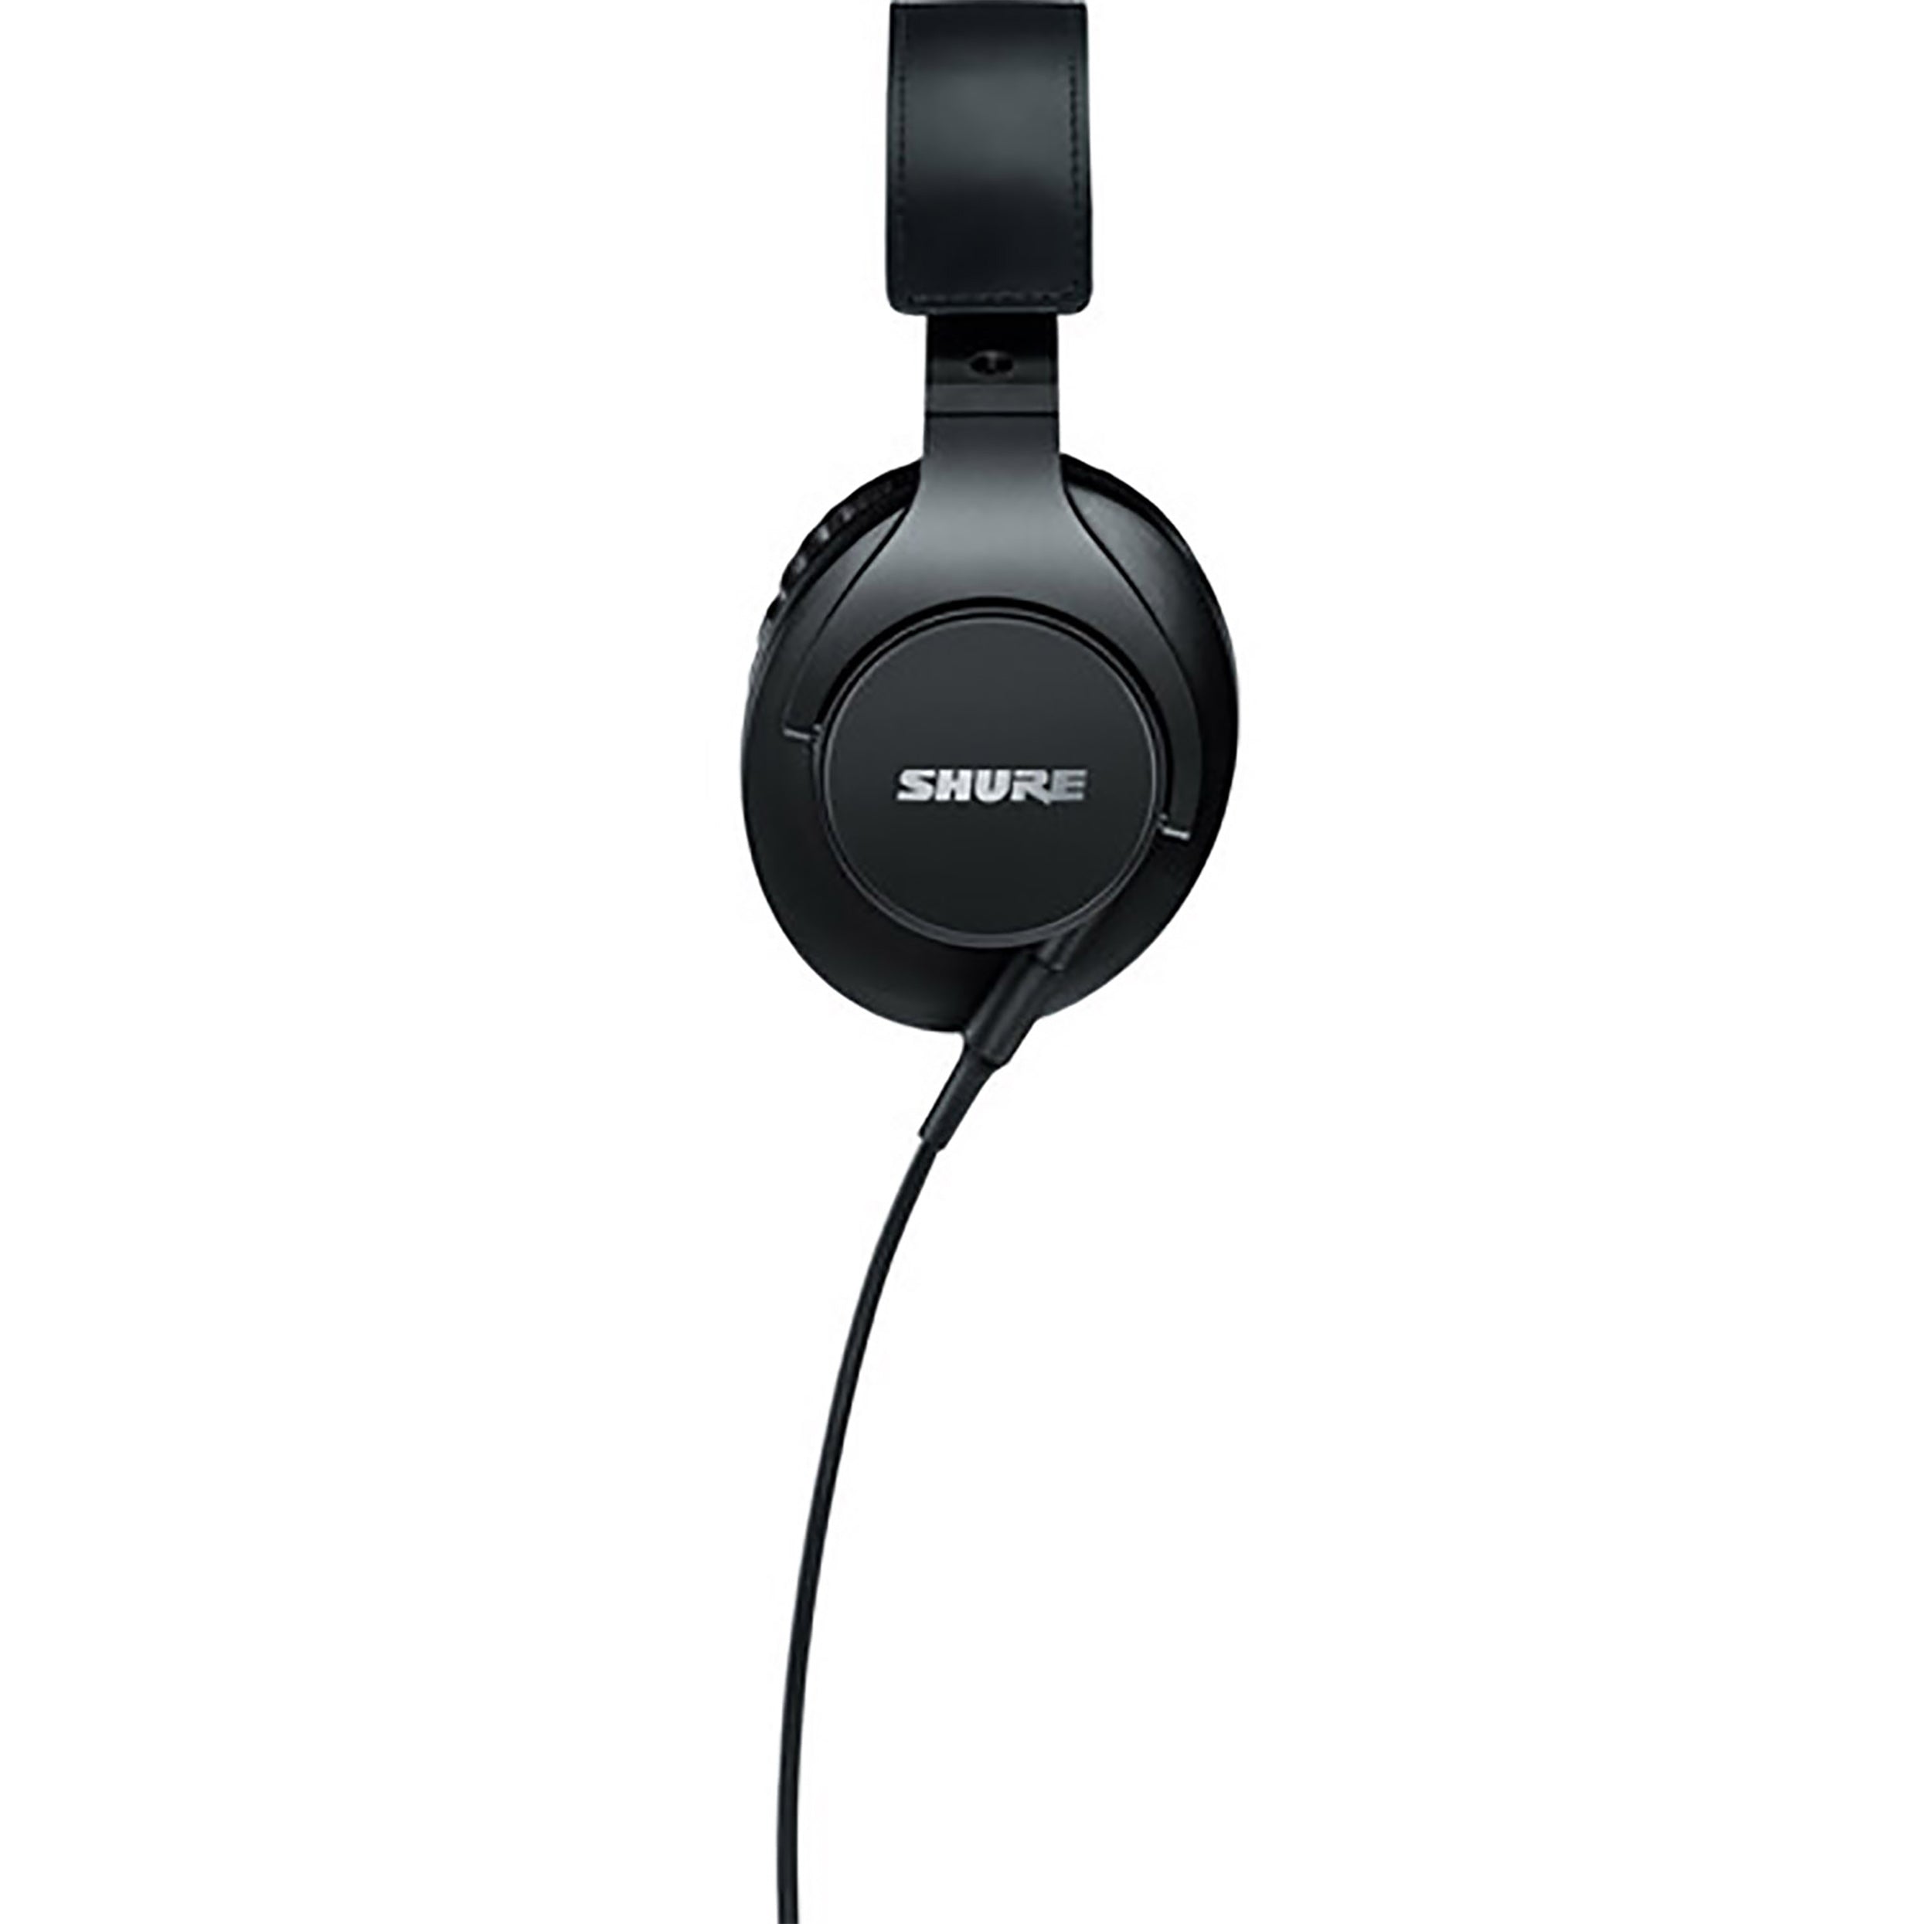 Shure SRH440A Professional Closed-Back Over-Ear Studio Headphones by Shure